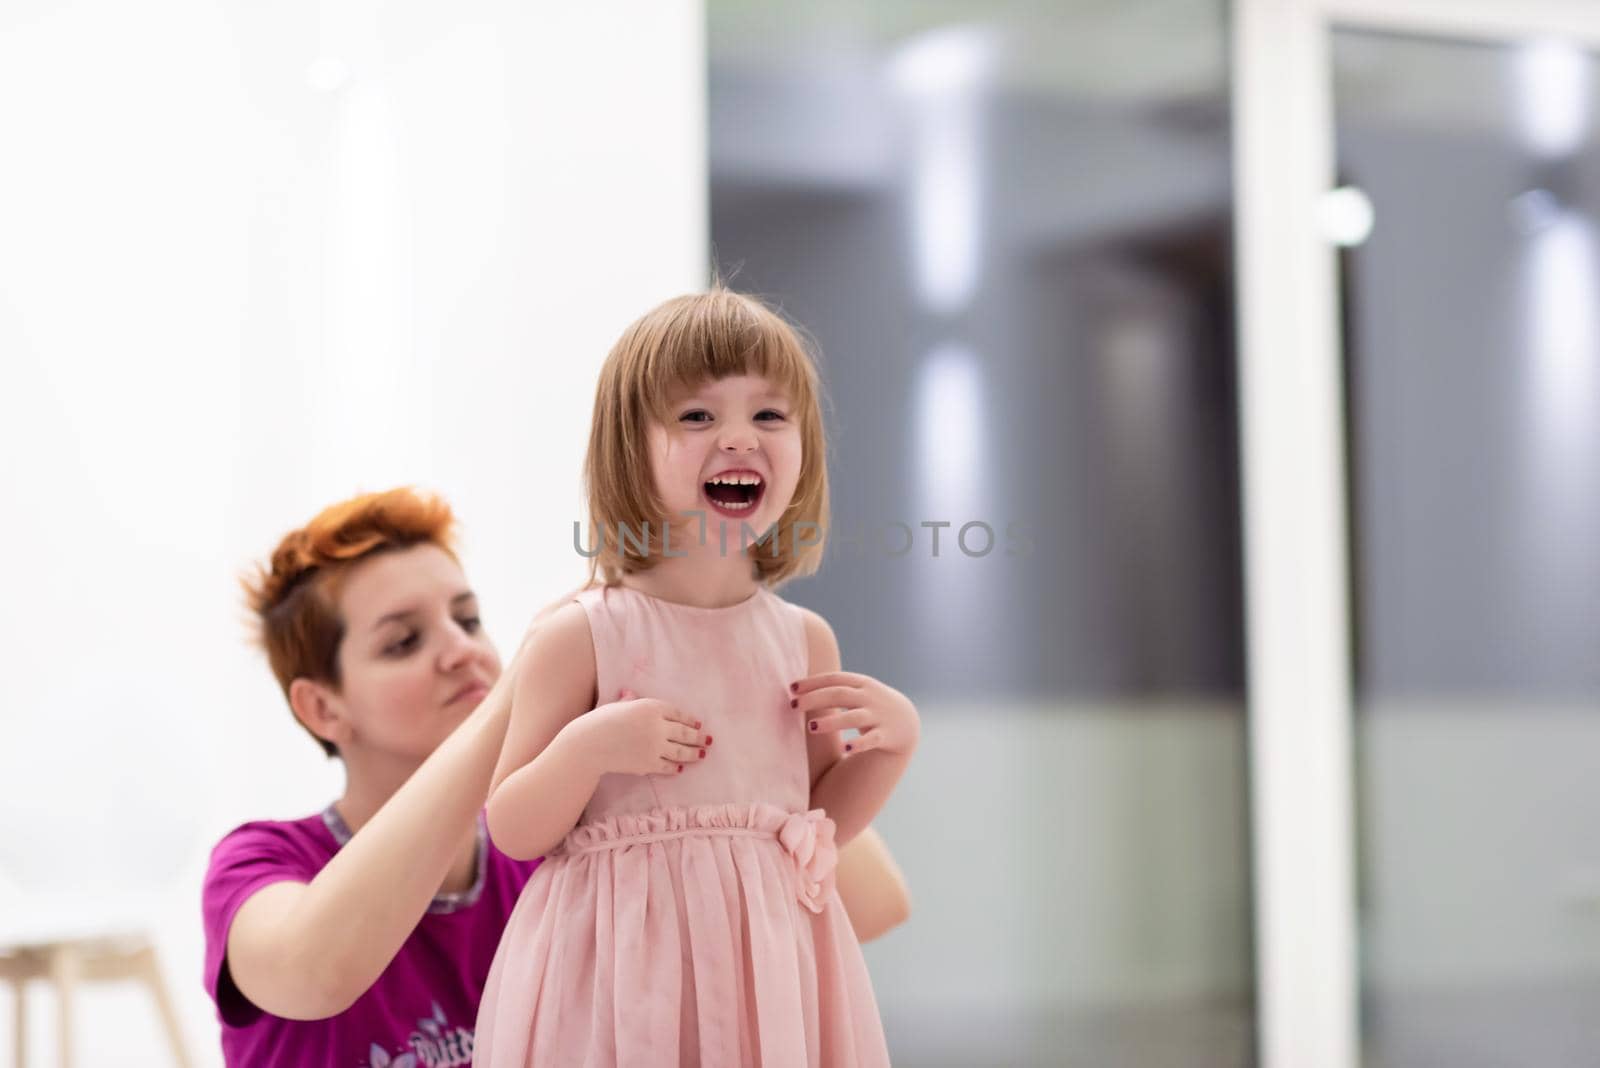 young mother helping daughter while putting on a dress by dotshock